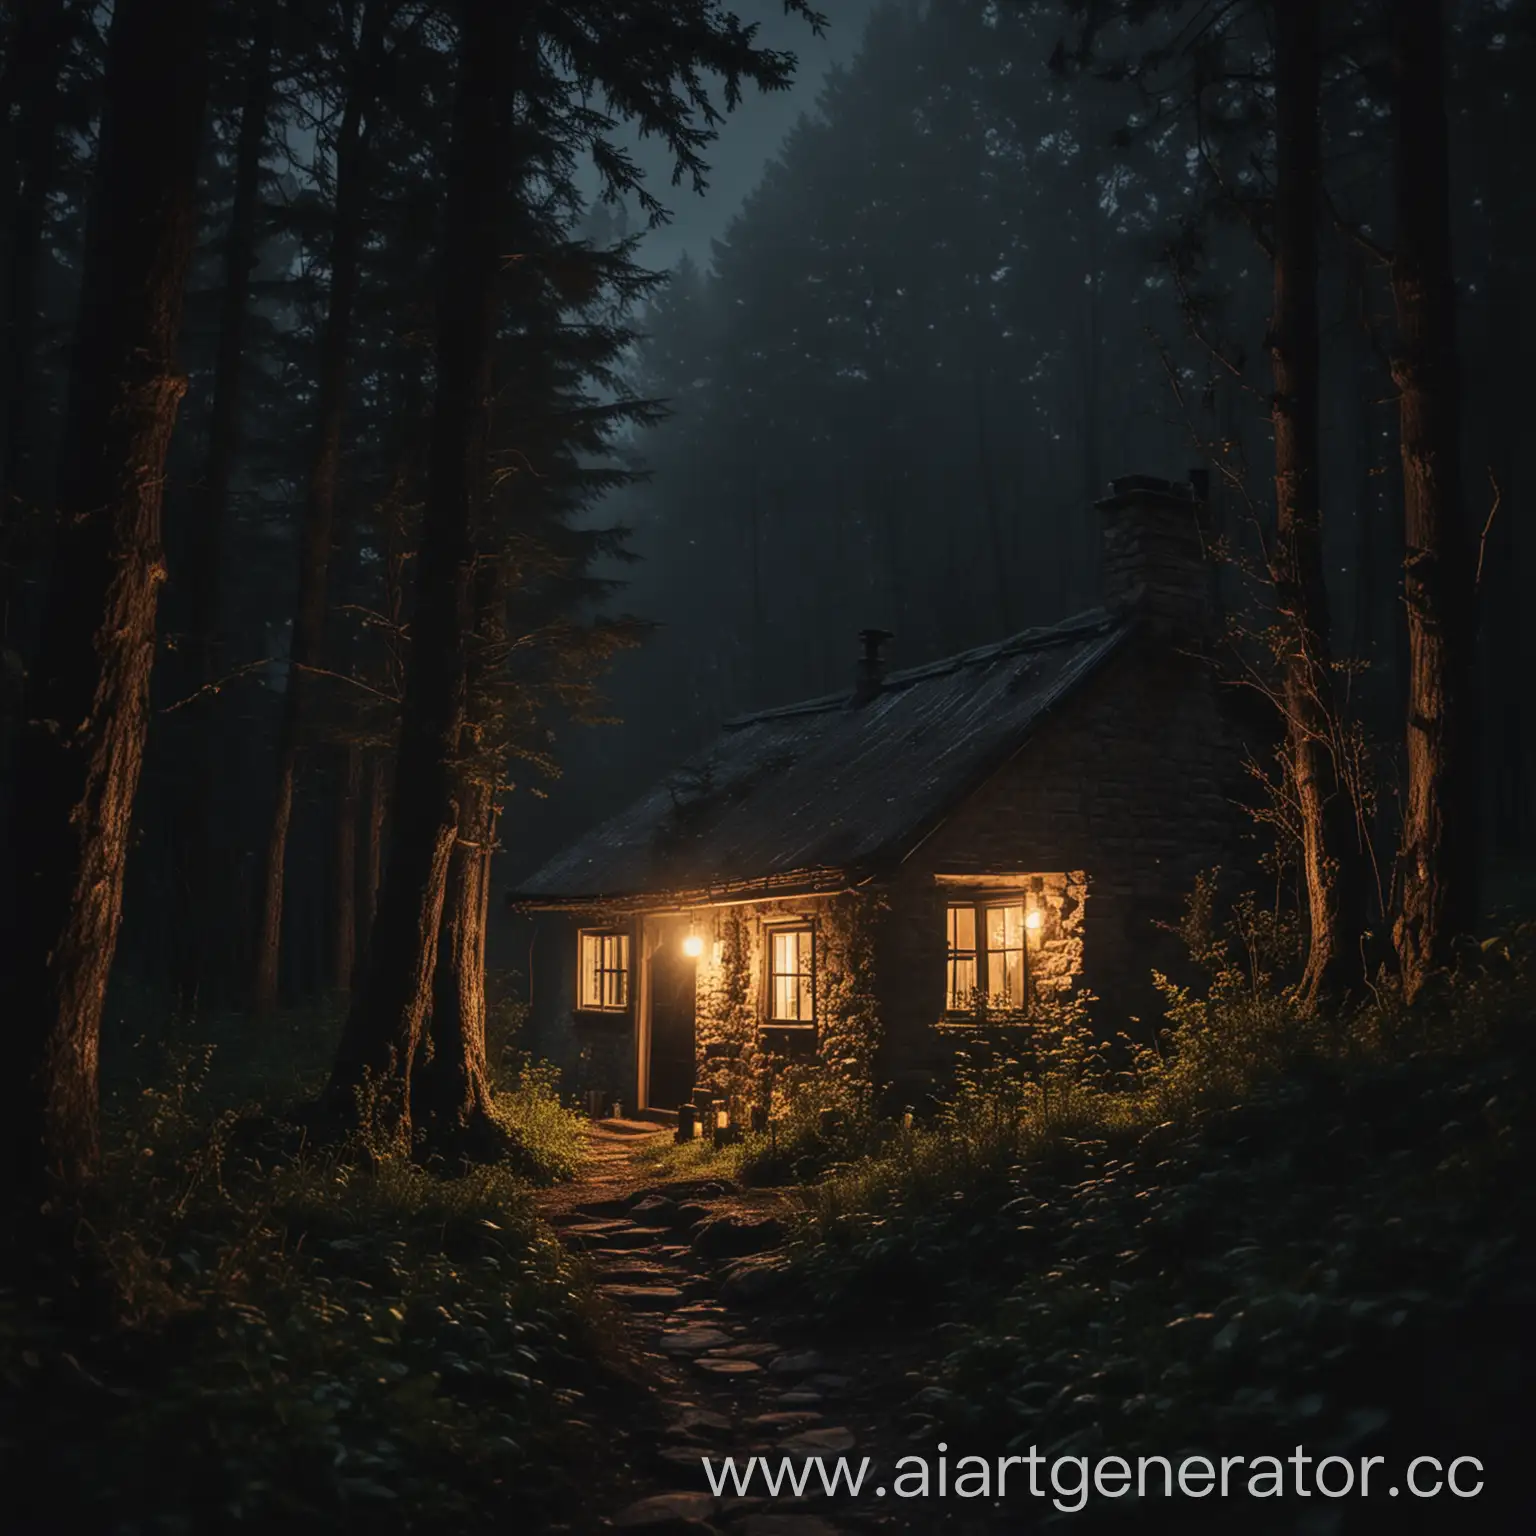 Solitary-Candlelit-Cottage-in-Enchanted-Forest-at-Night